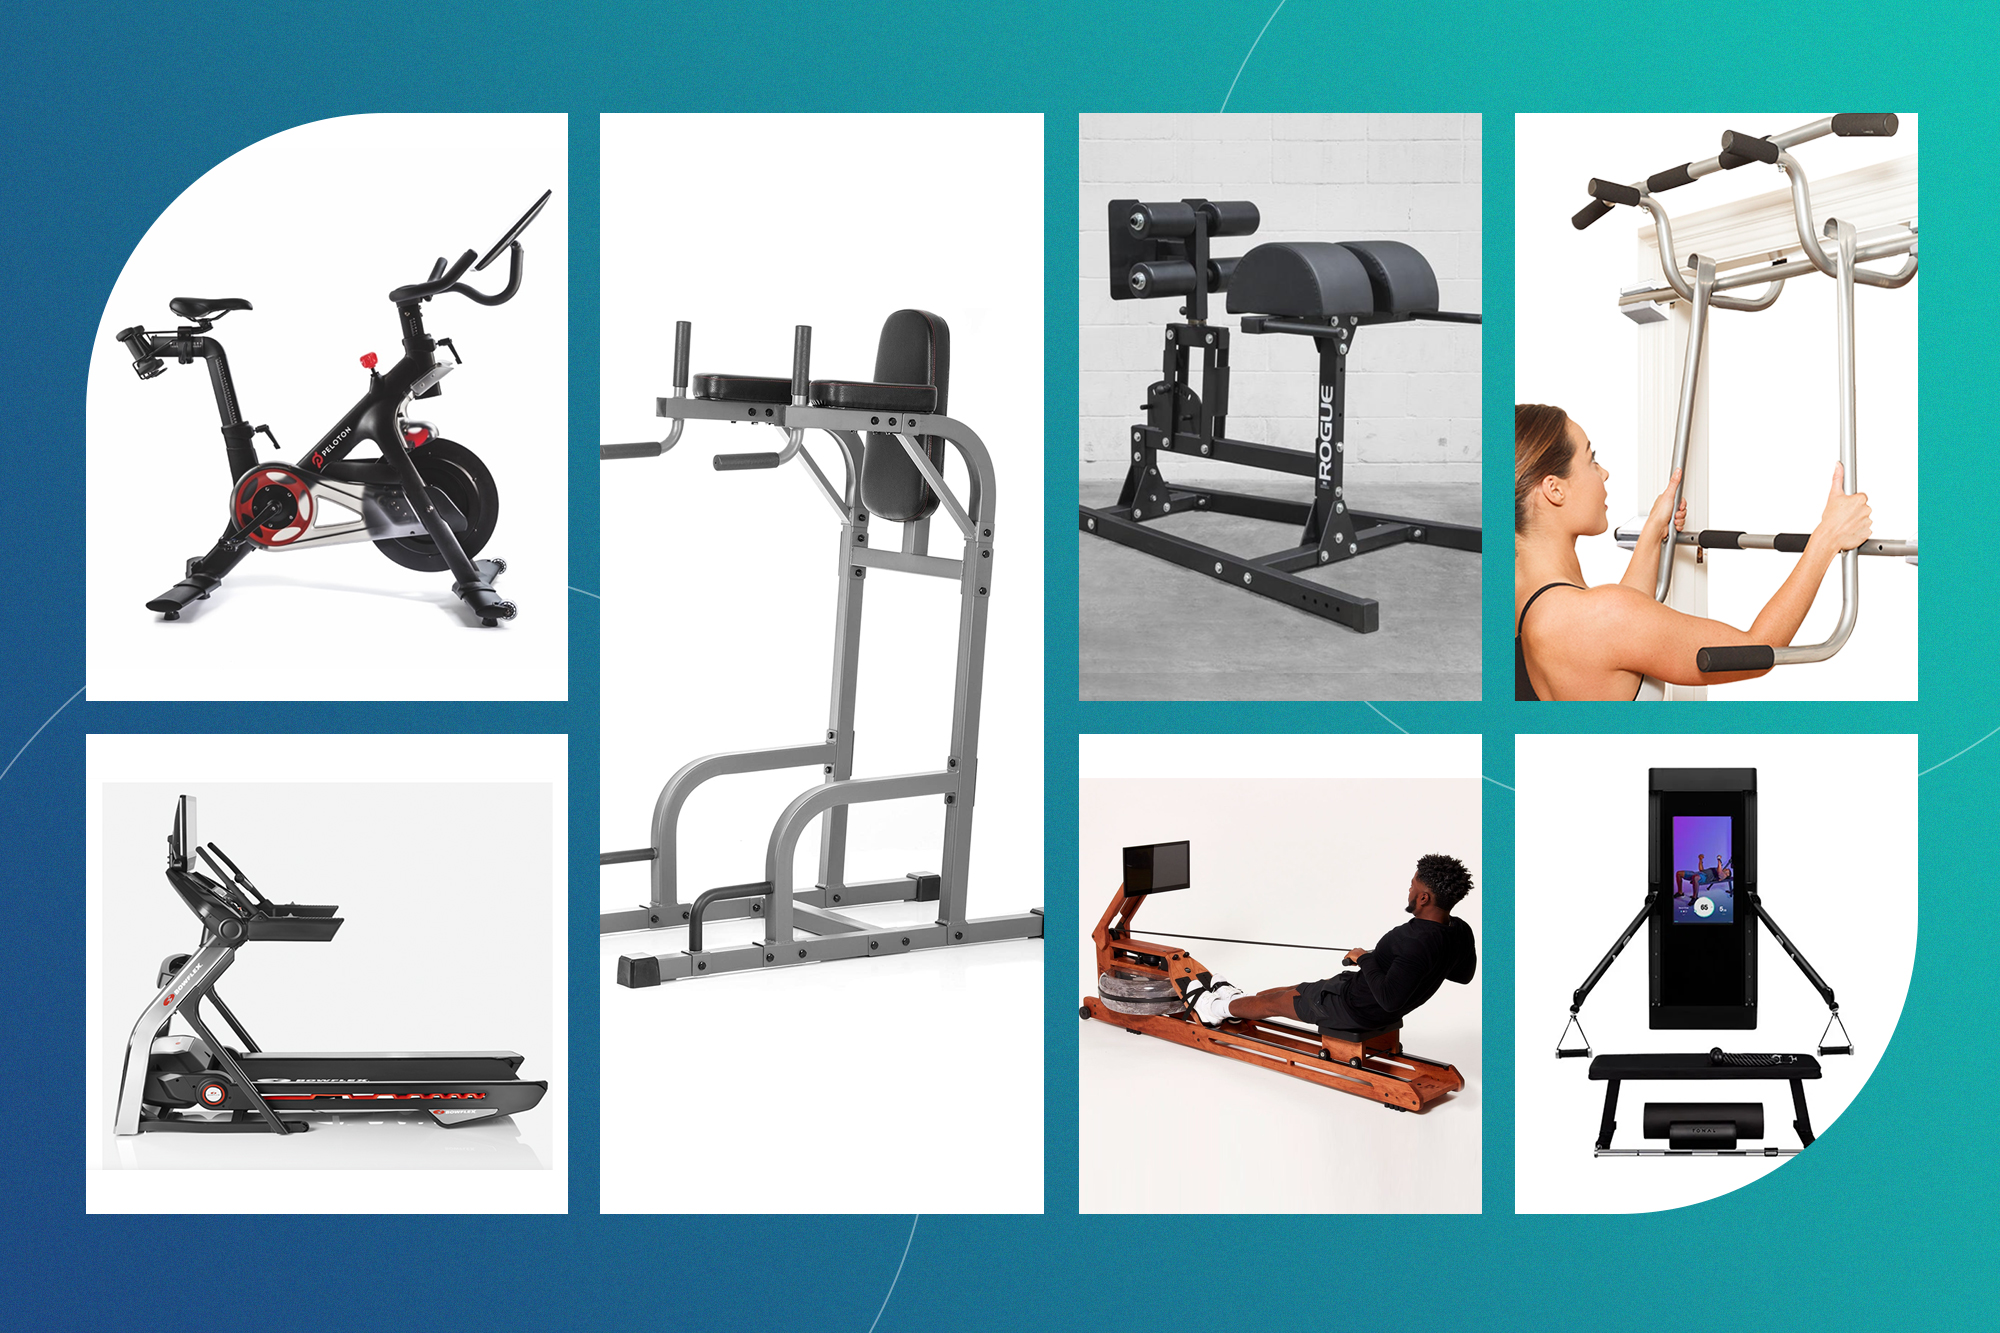 Fitness Experience - Your Commercial Fitness Equipment Experts